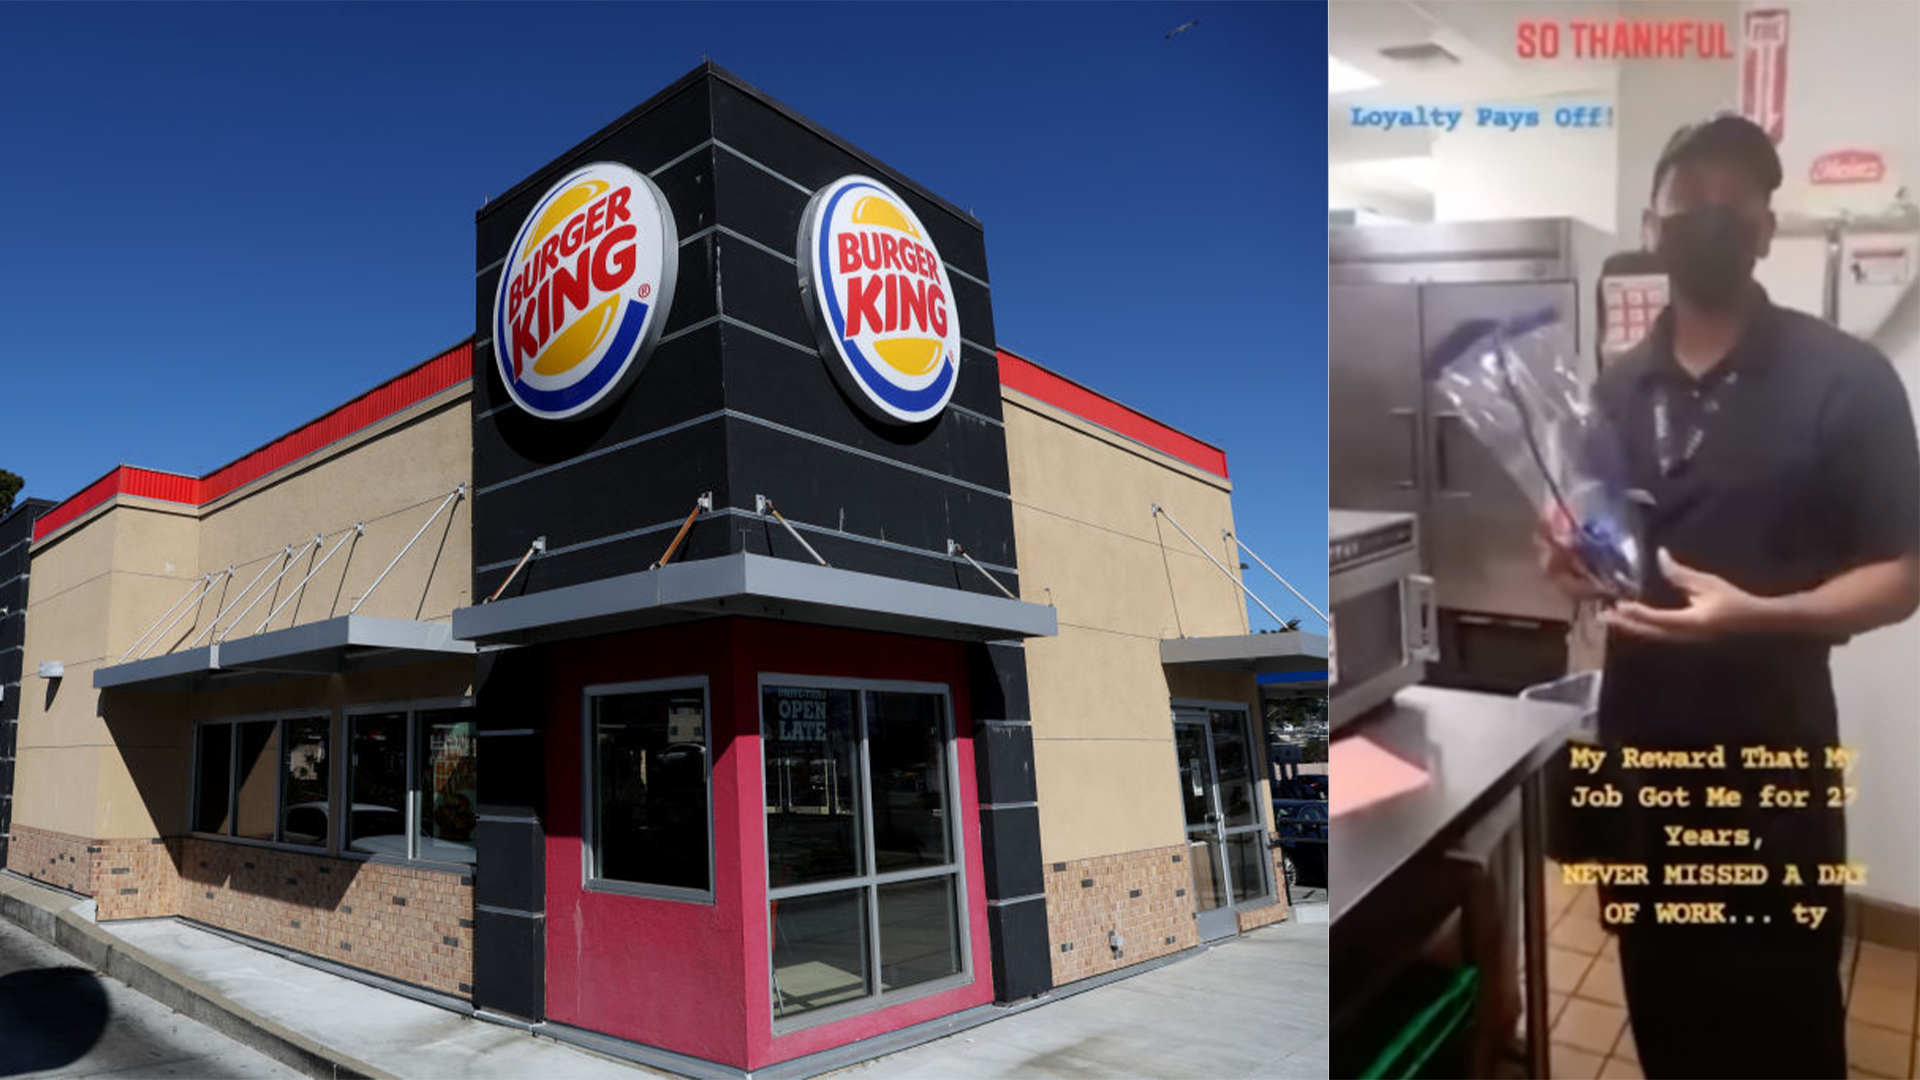 The Burger King Employee Who Received $450K In Donations From Social Media Becomes A Homeowner, Says It’s ‘Truly An American Dream’